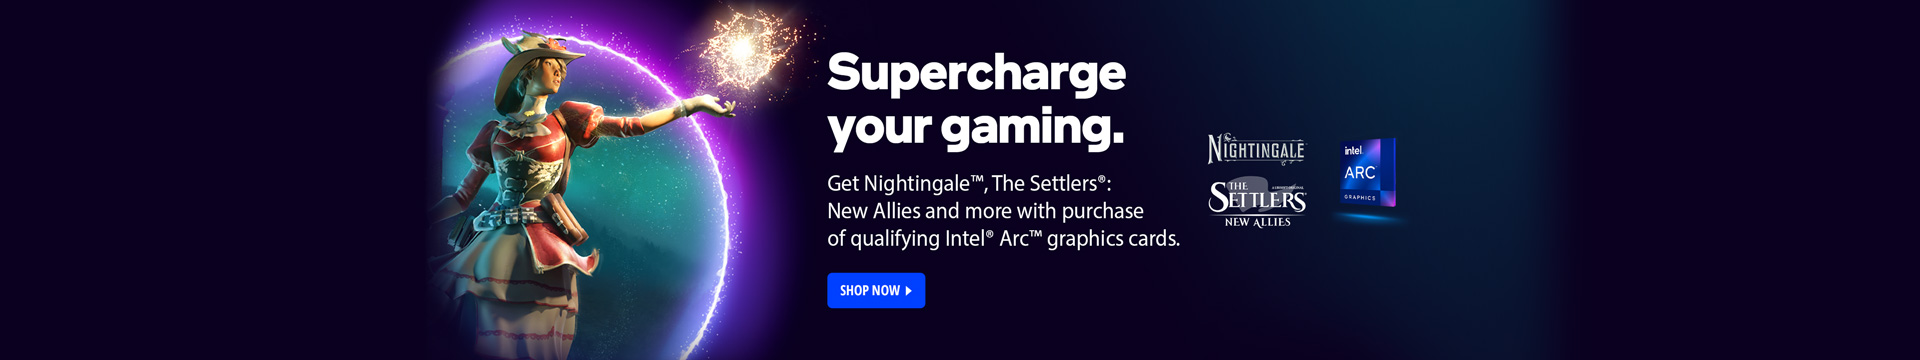 Supercharge your gaming